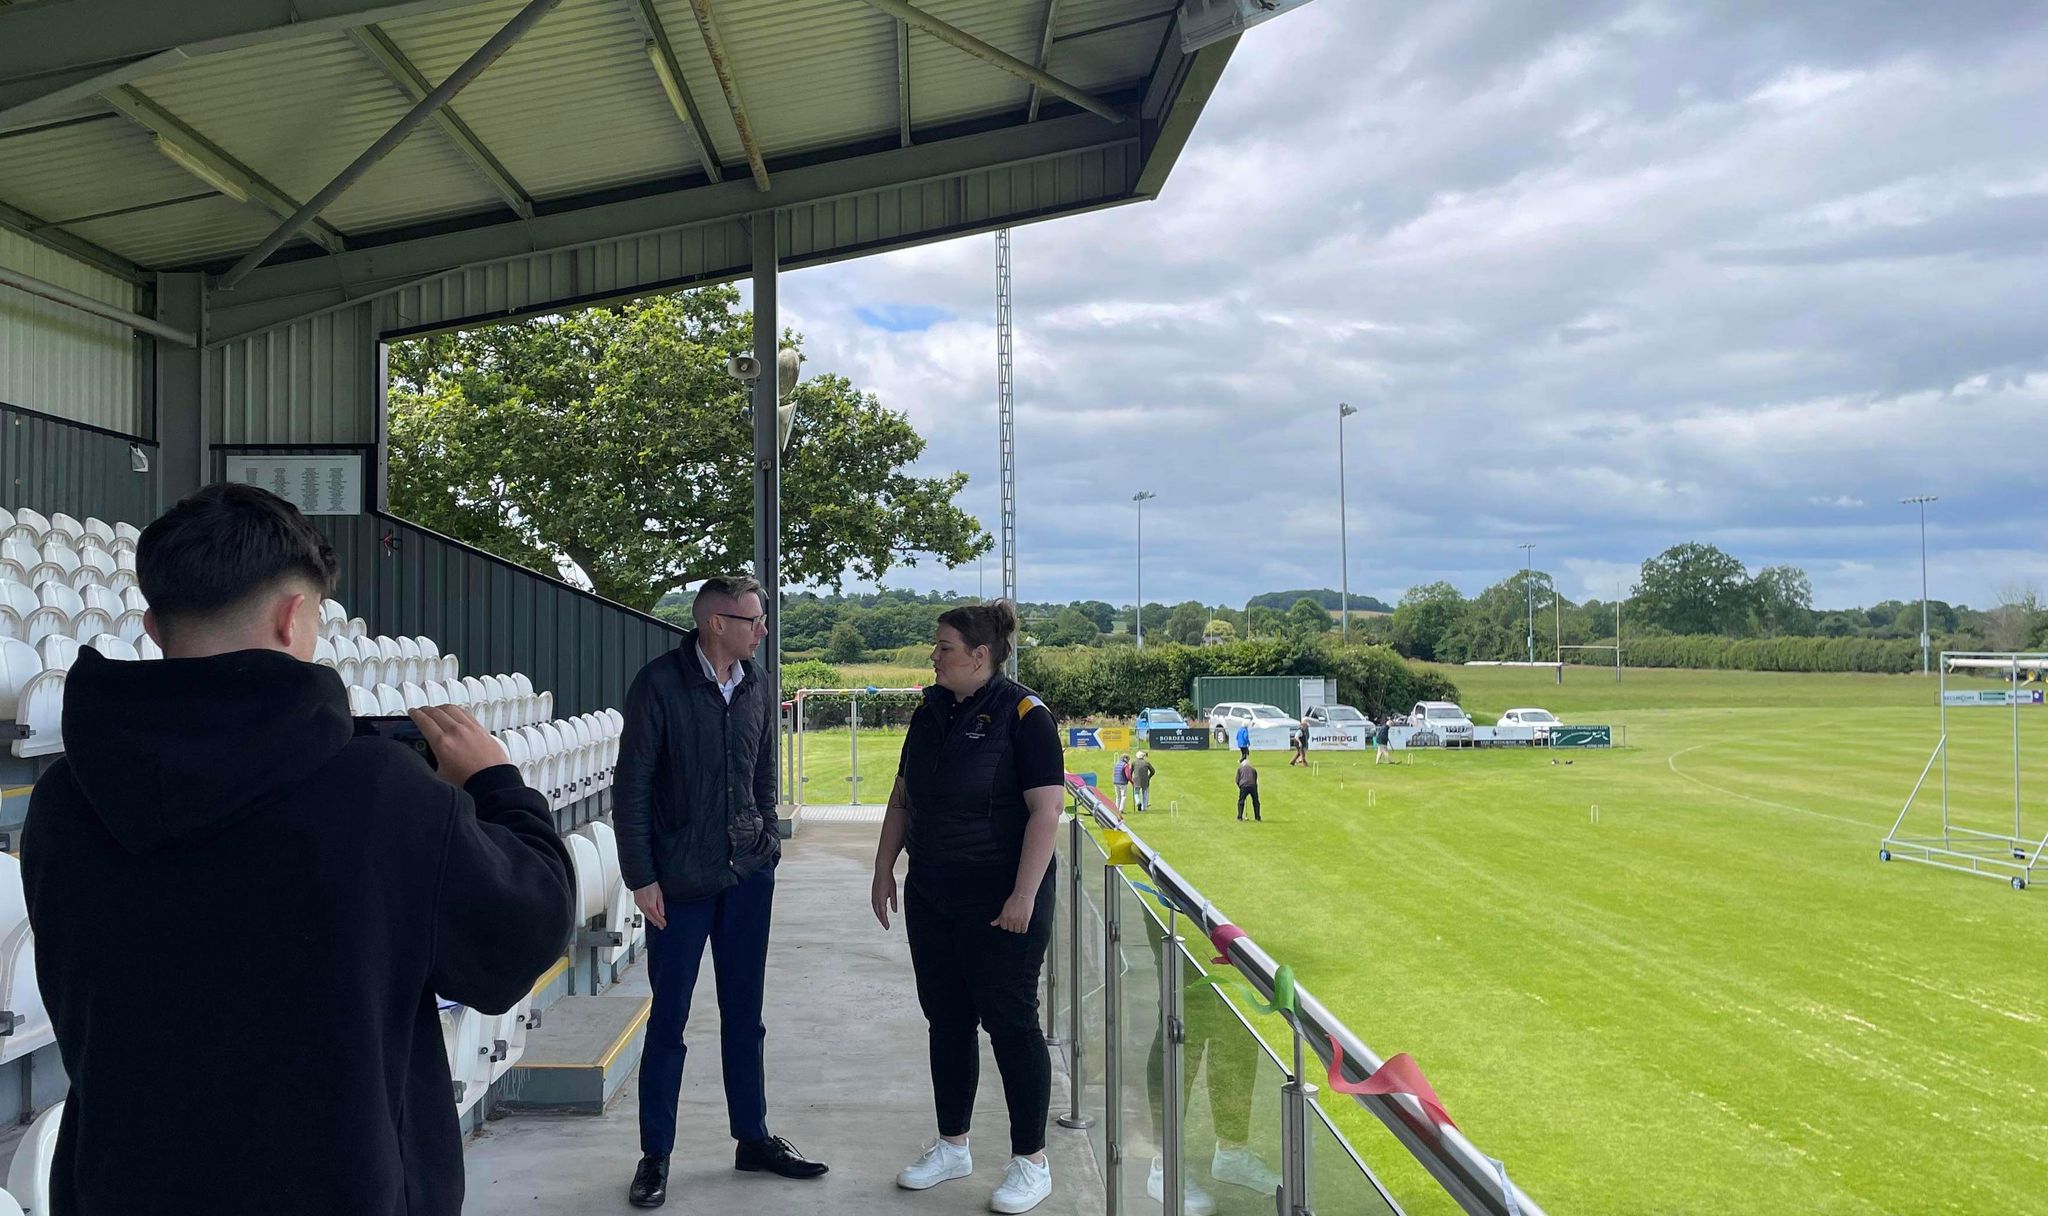 RUGBY | Matt Healey interview with the Commercial and Events Manager at Luctonians Rugby Club